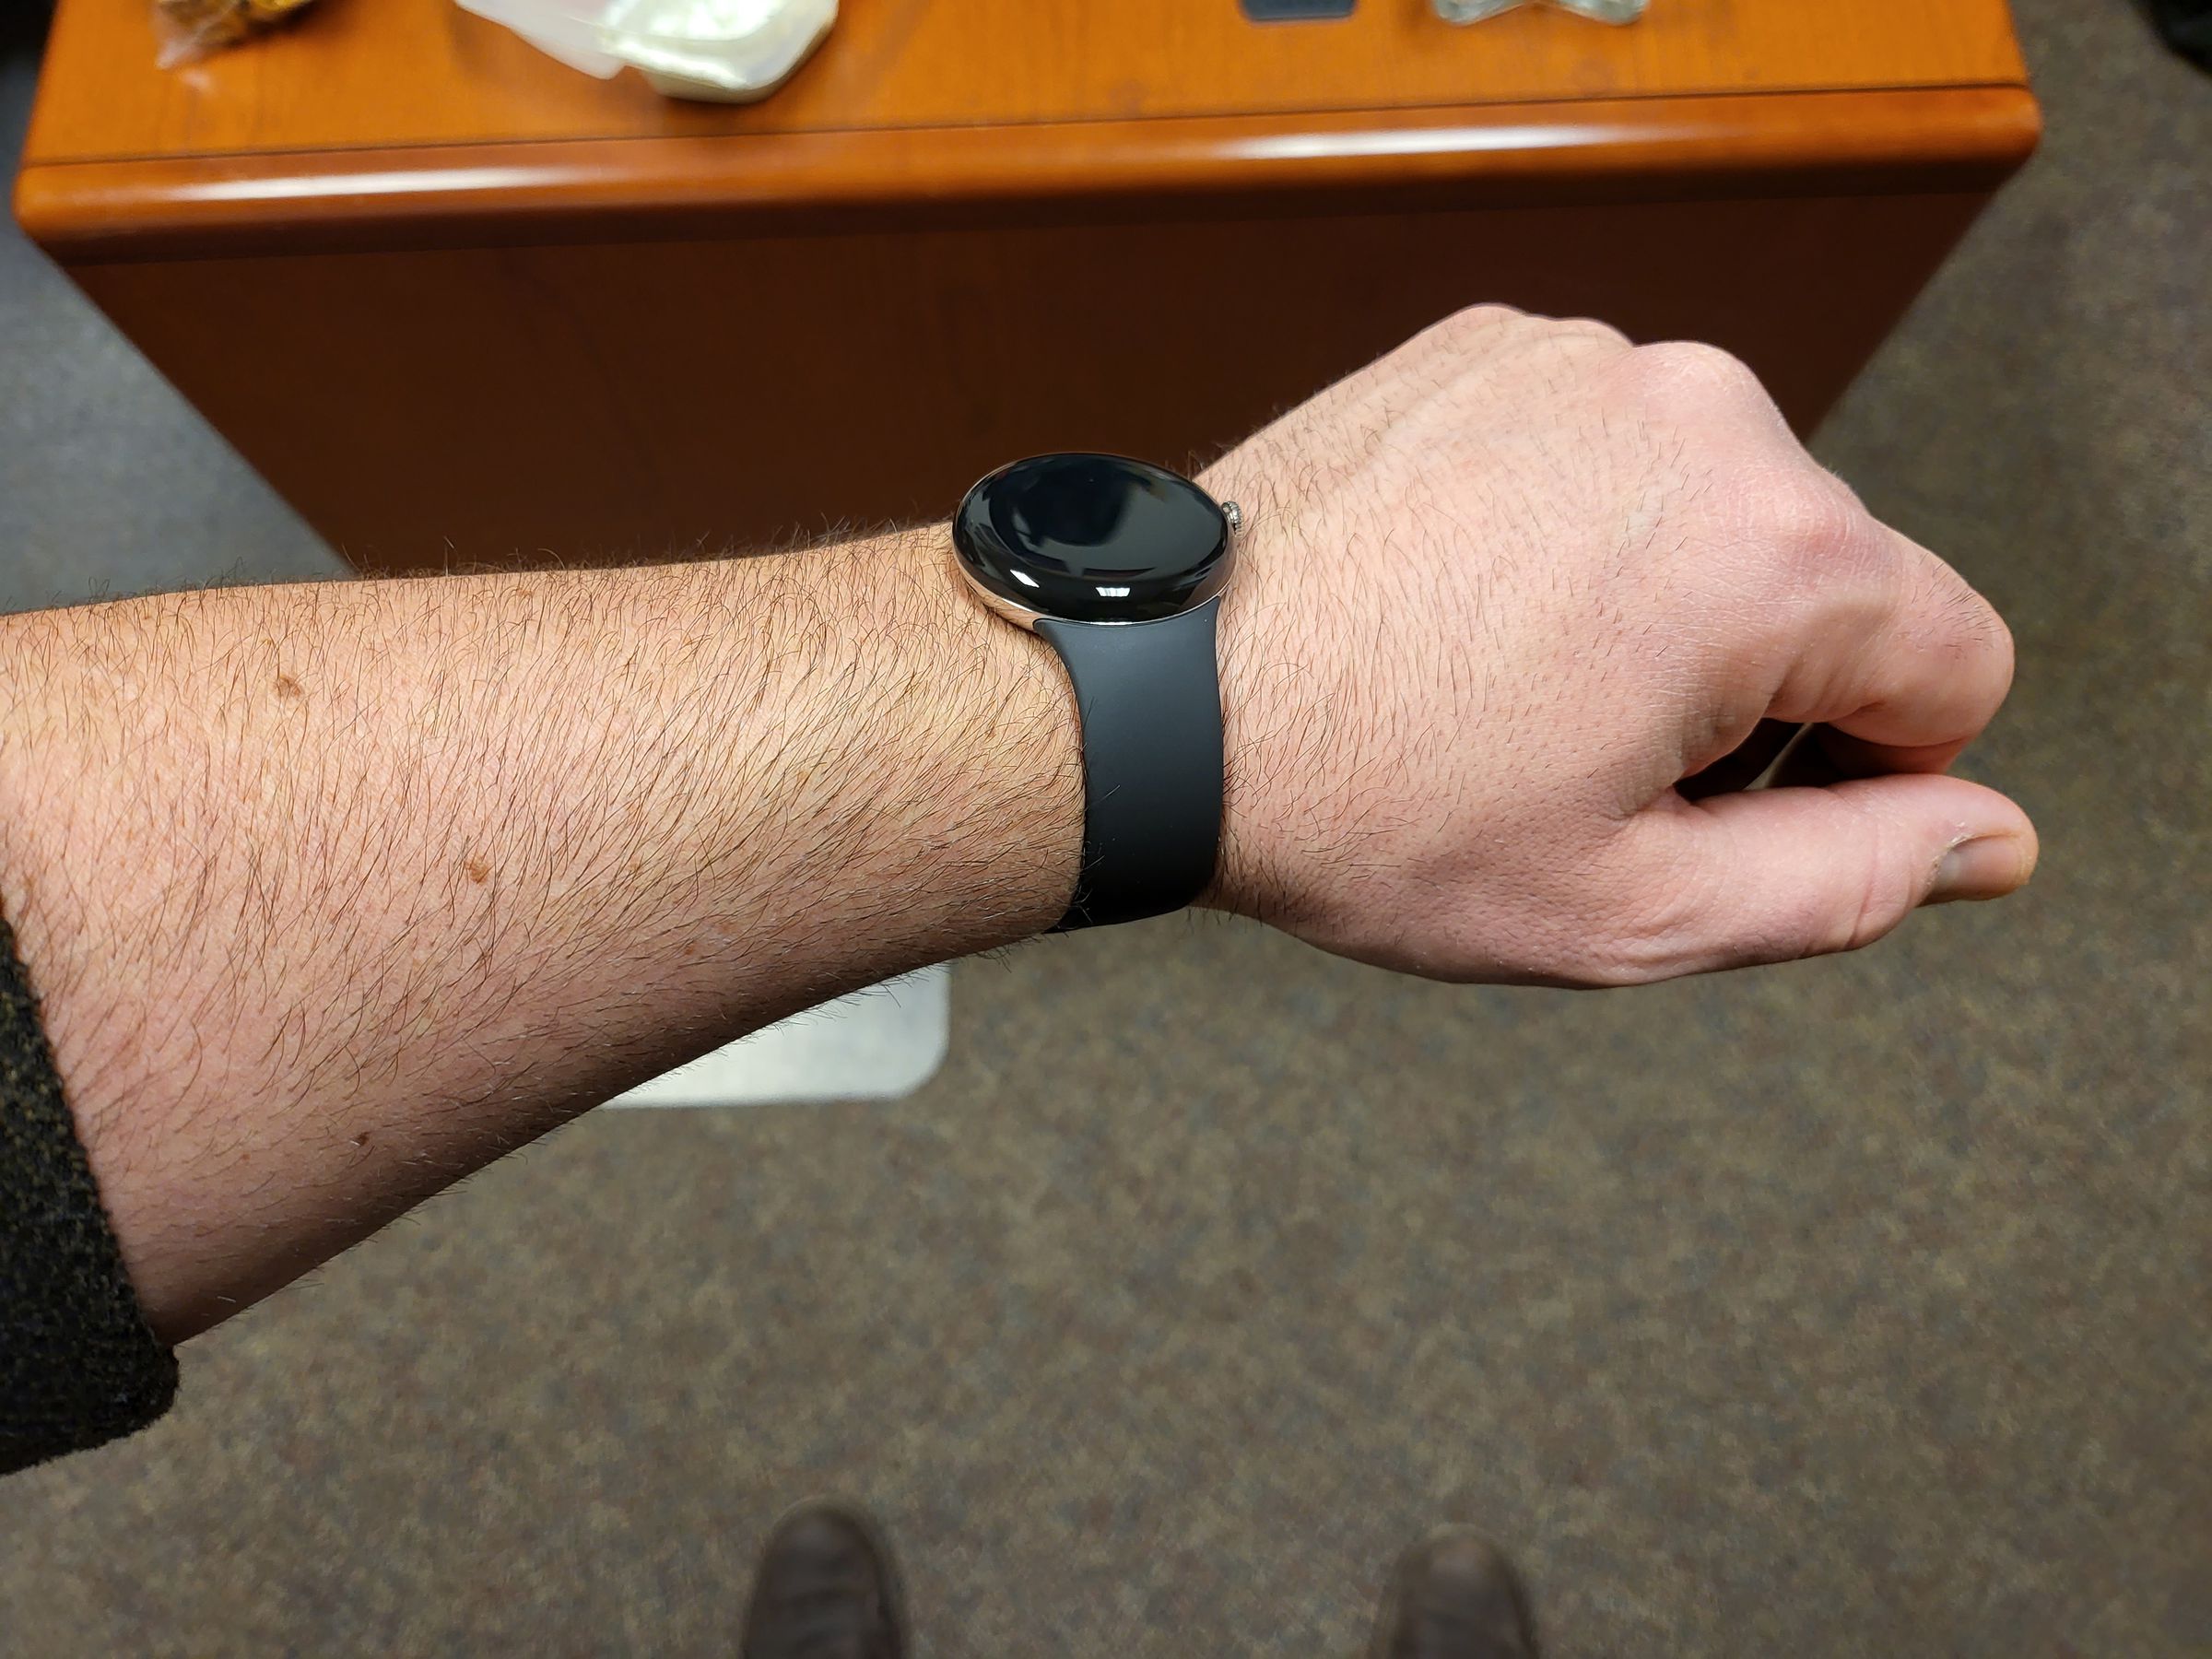 A Redditor claims to show off the Pixel Watch.